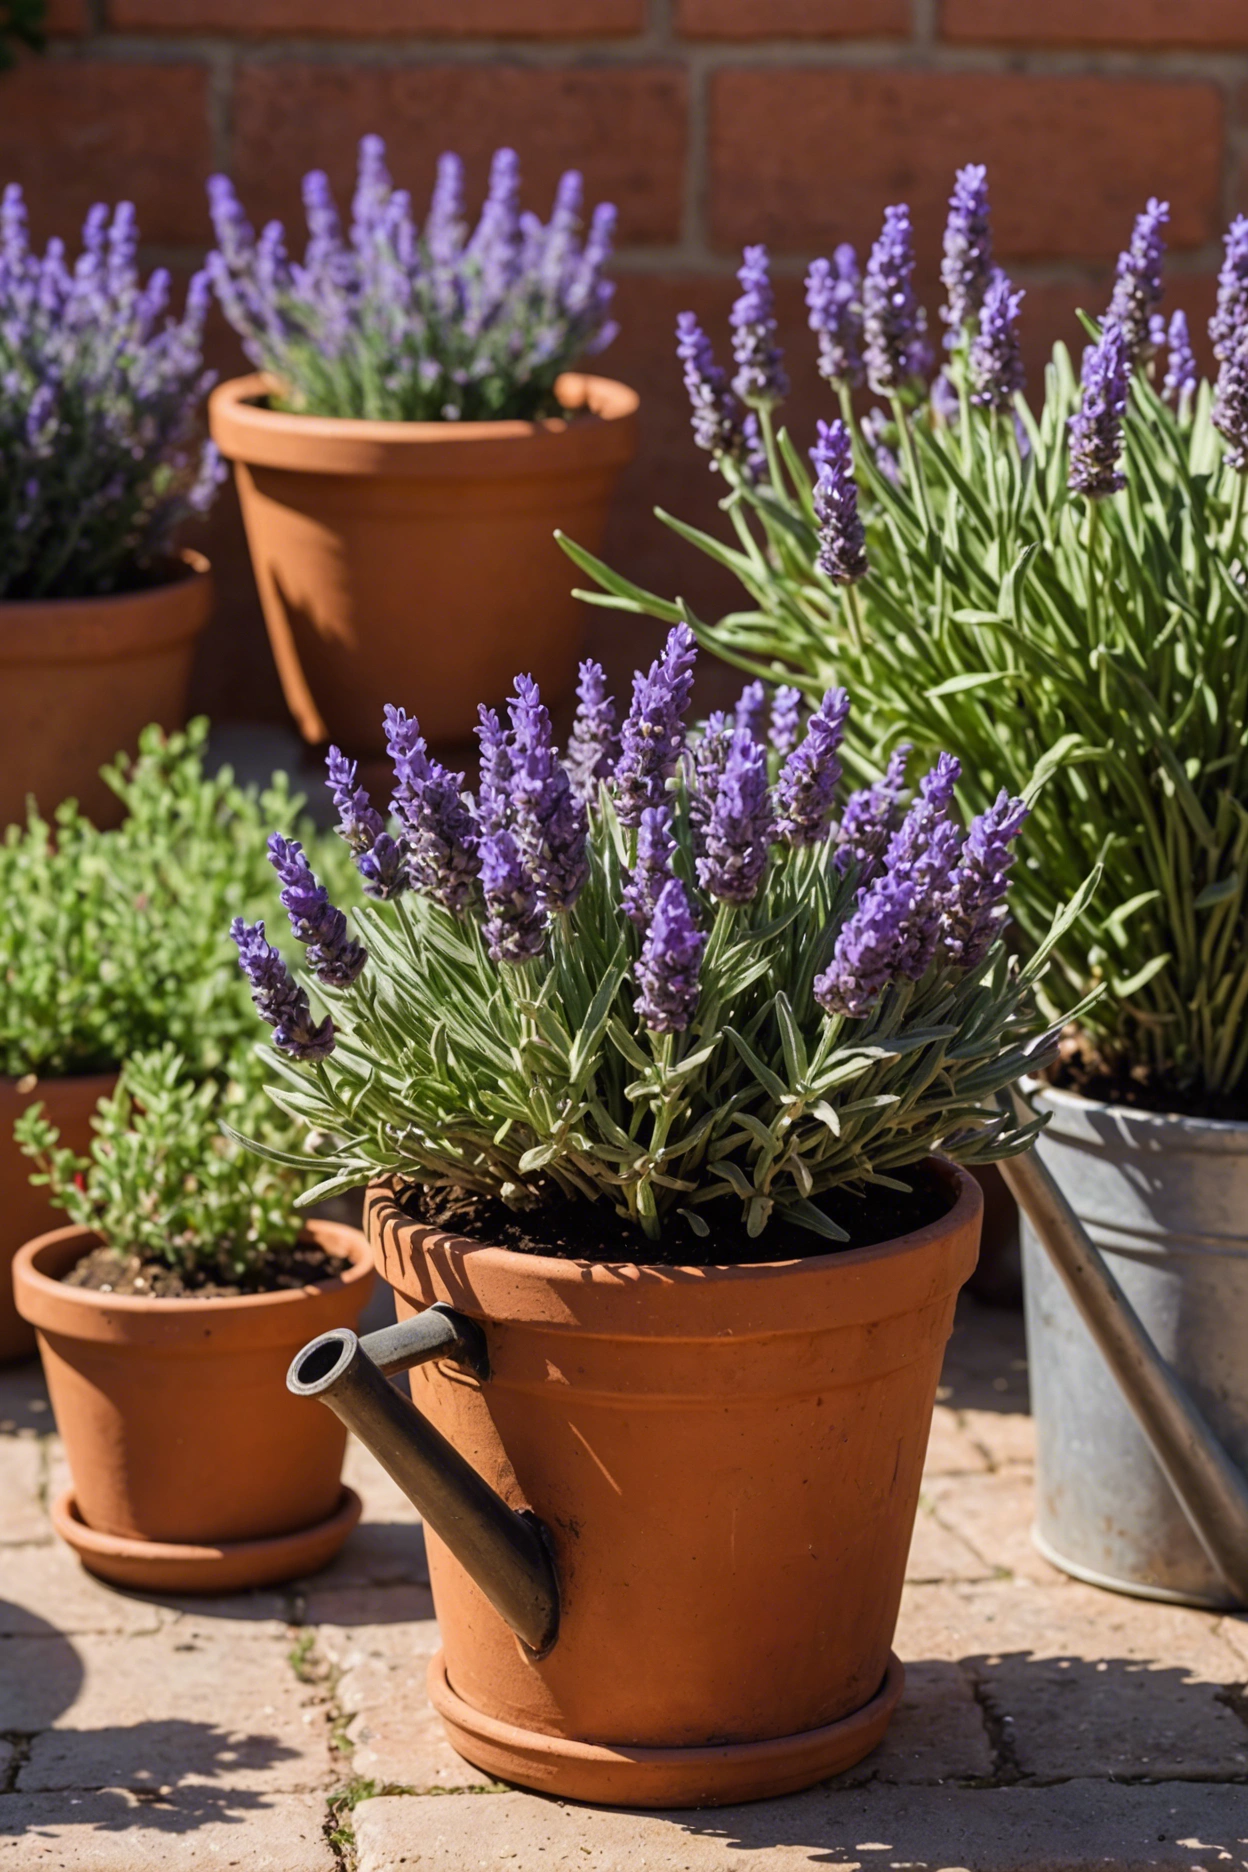 "Wilted lavender plant in a terracotta pot under harsh sunlight, with a watering can and moisture meter nearby."